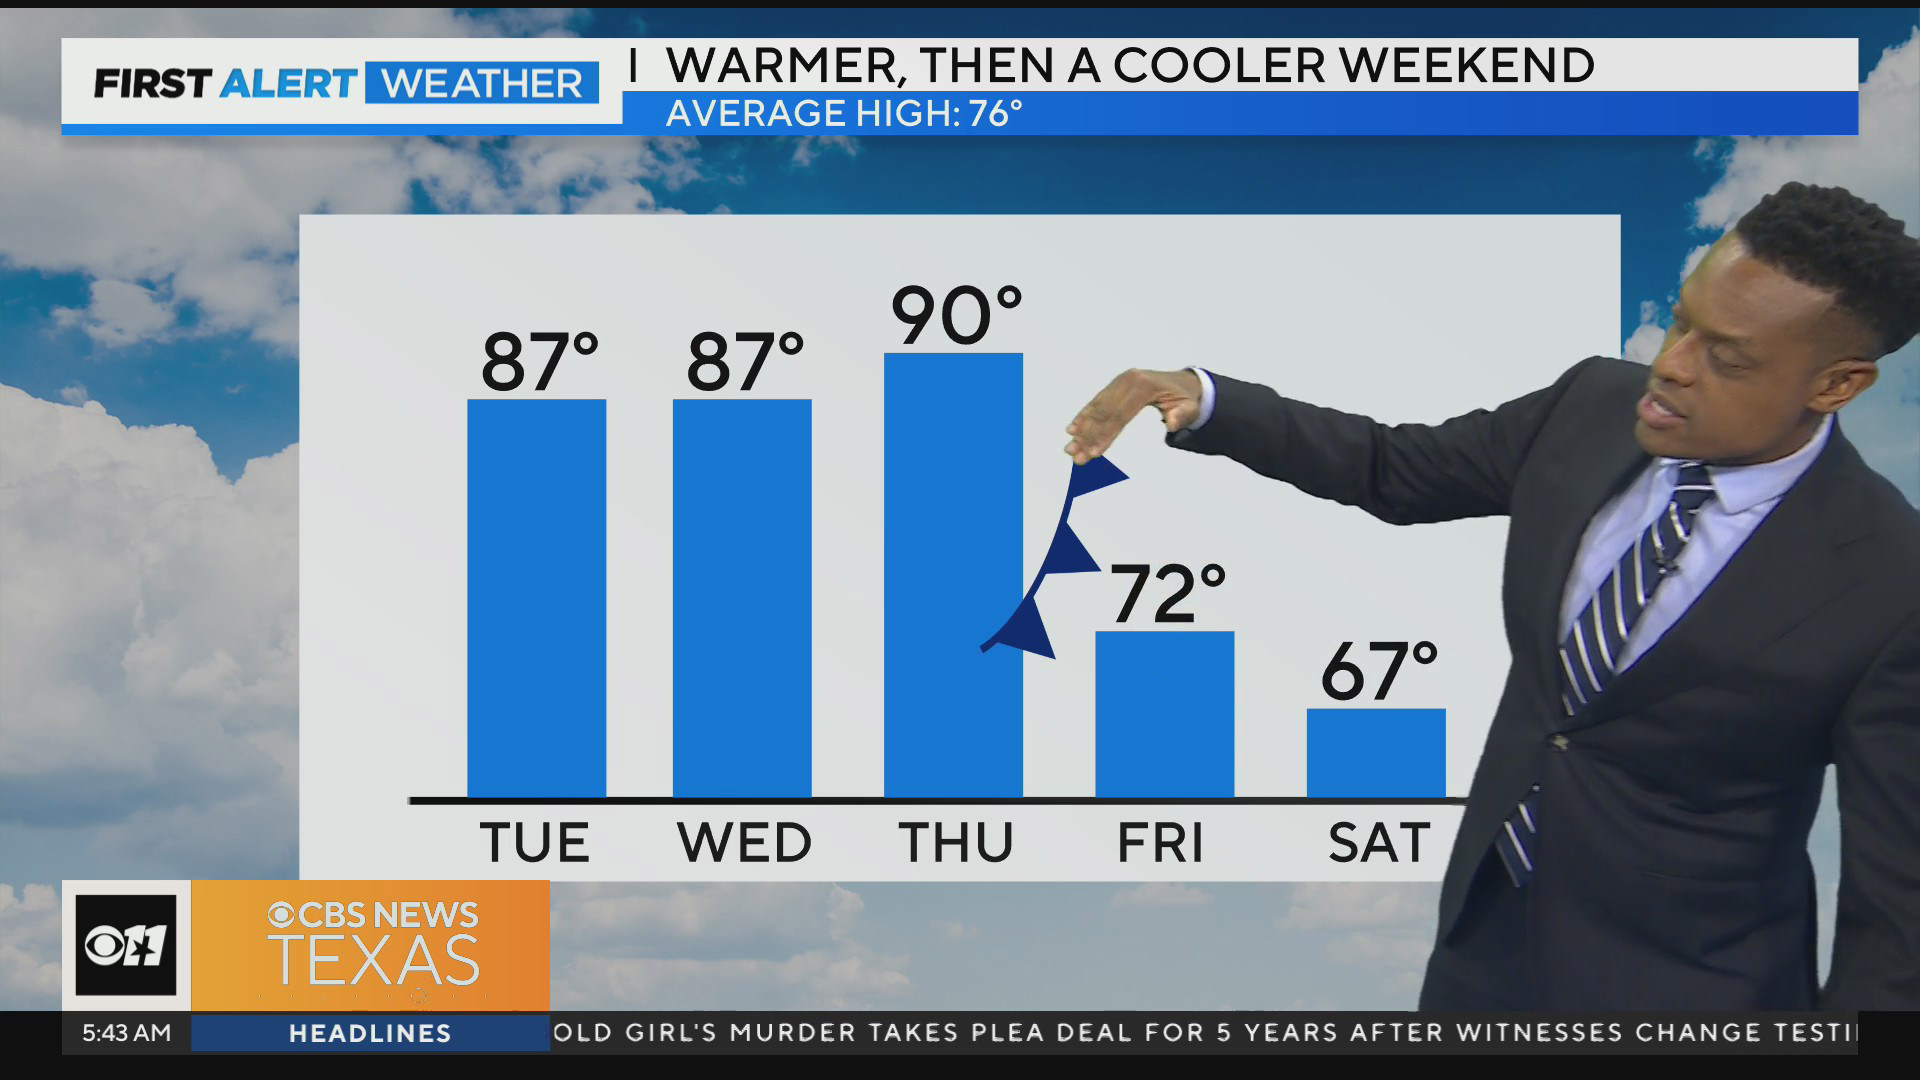 Warmer days are ahead of a weekend cold front